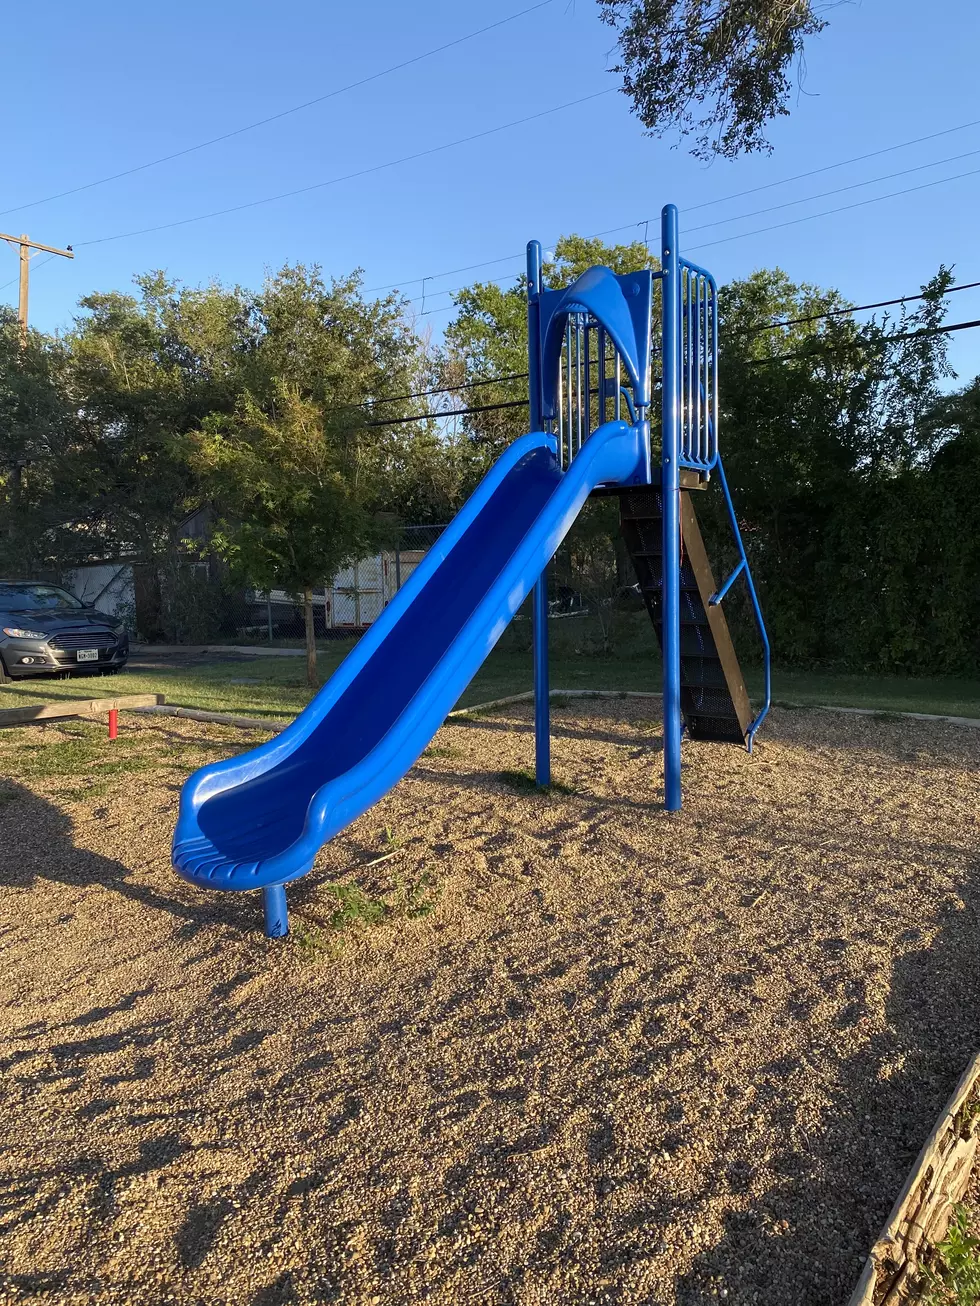 New Slide At St. Mary’s Park? The Kids Skin Says Thank You.